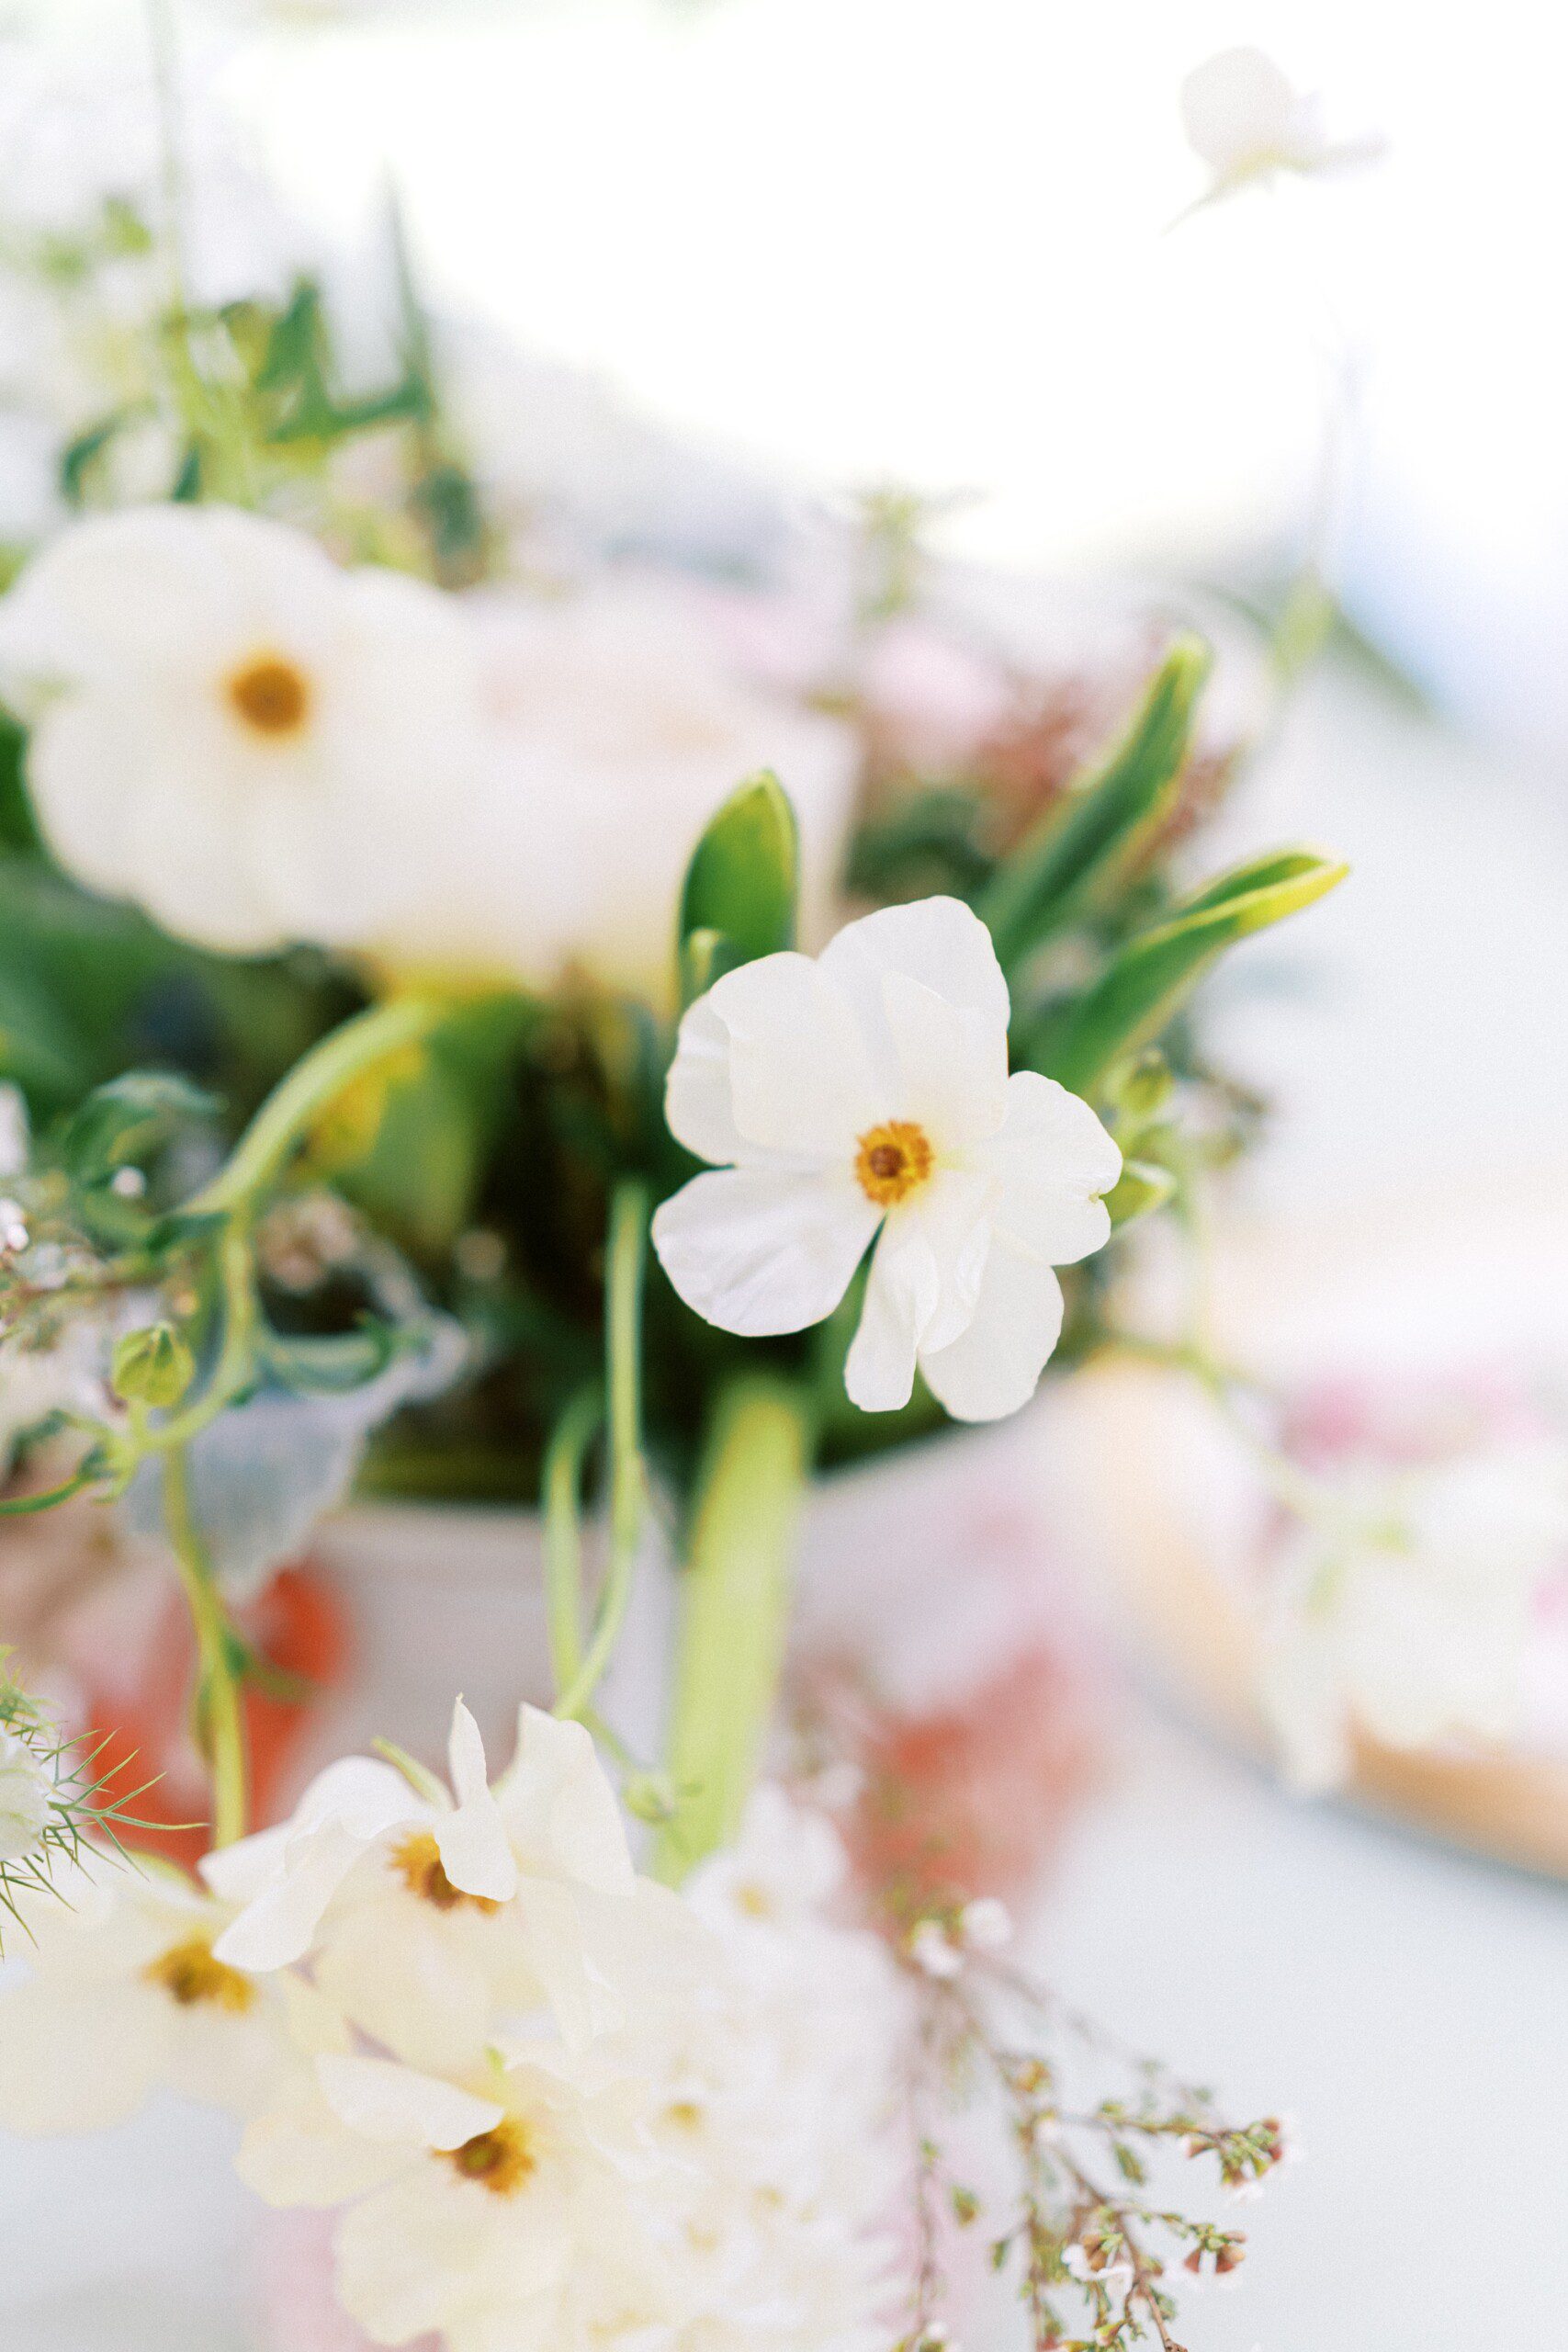 Delicate florals for a whimsical garden wedding